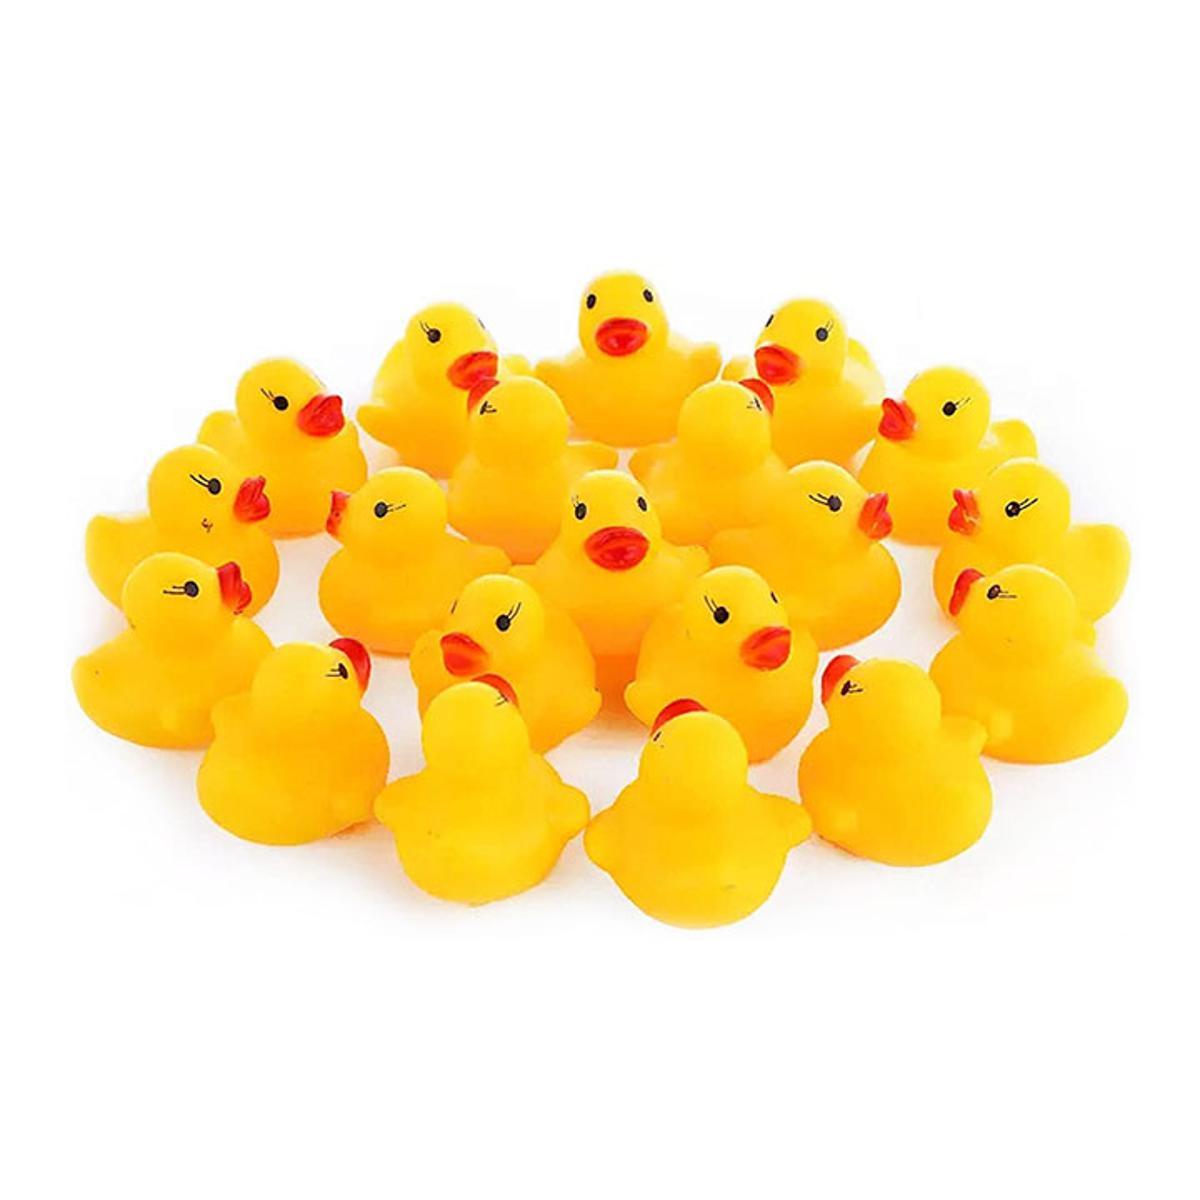 Rubber Duck Soft Toy Set - Yellow 8pc